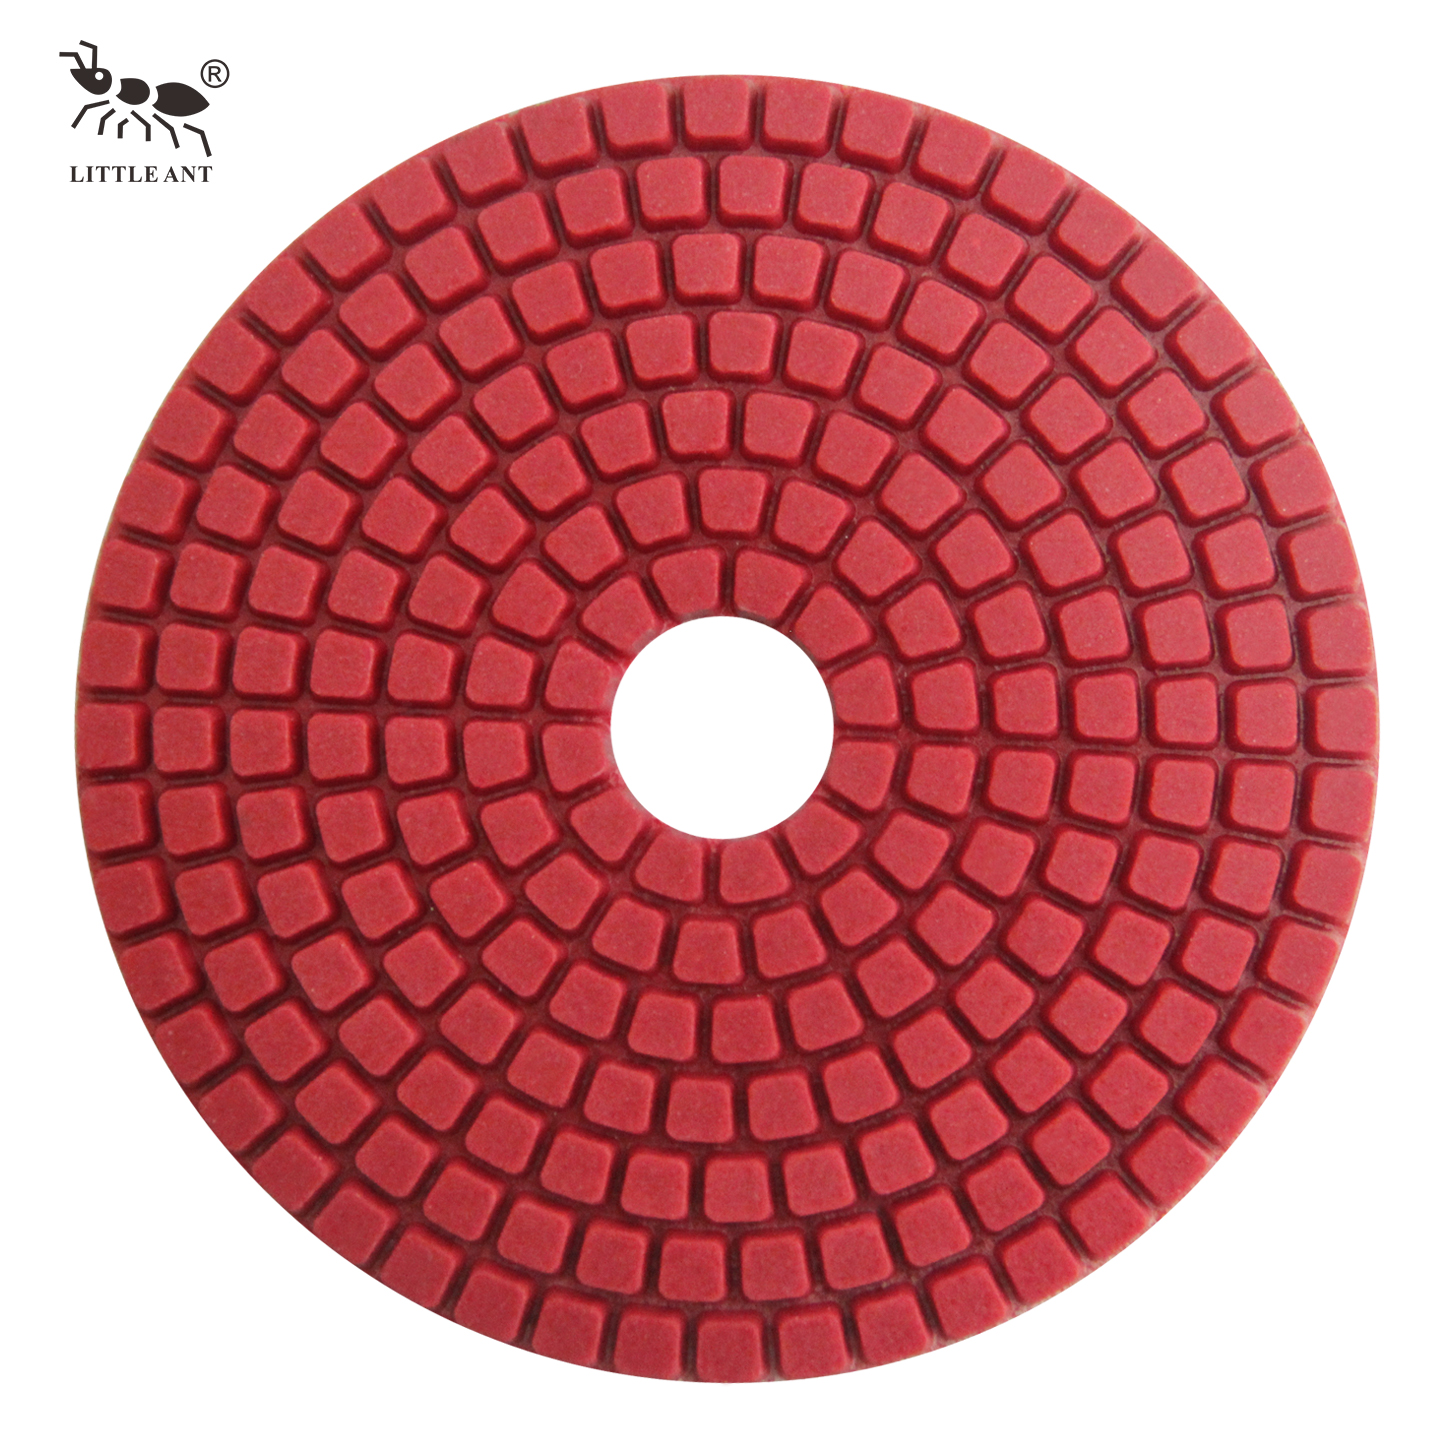 LITTLE ANT 4-inch & 5-inch & 6-inch Squre Wet Polishing Pad 7 Steps for Engineered Stone Hot Pressed Diamond Stone